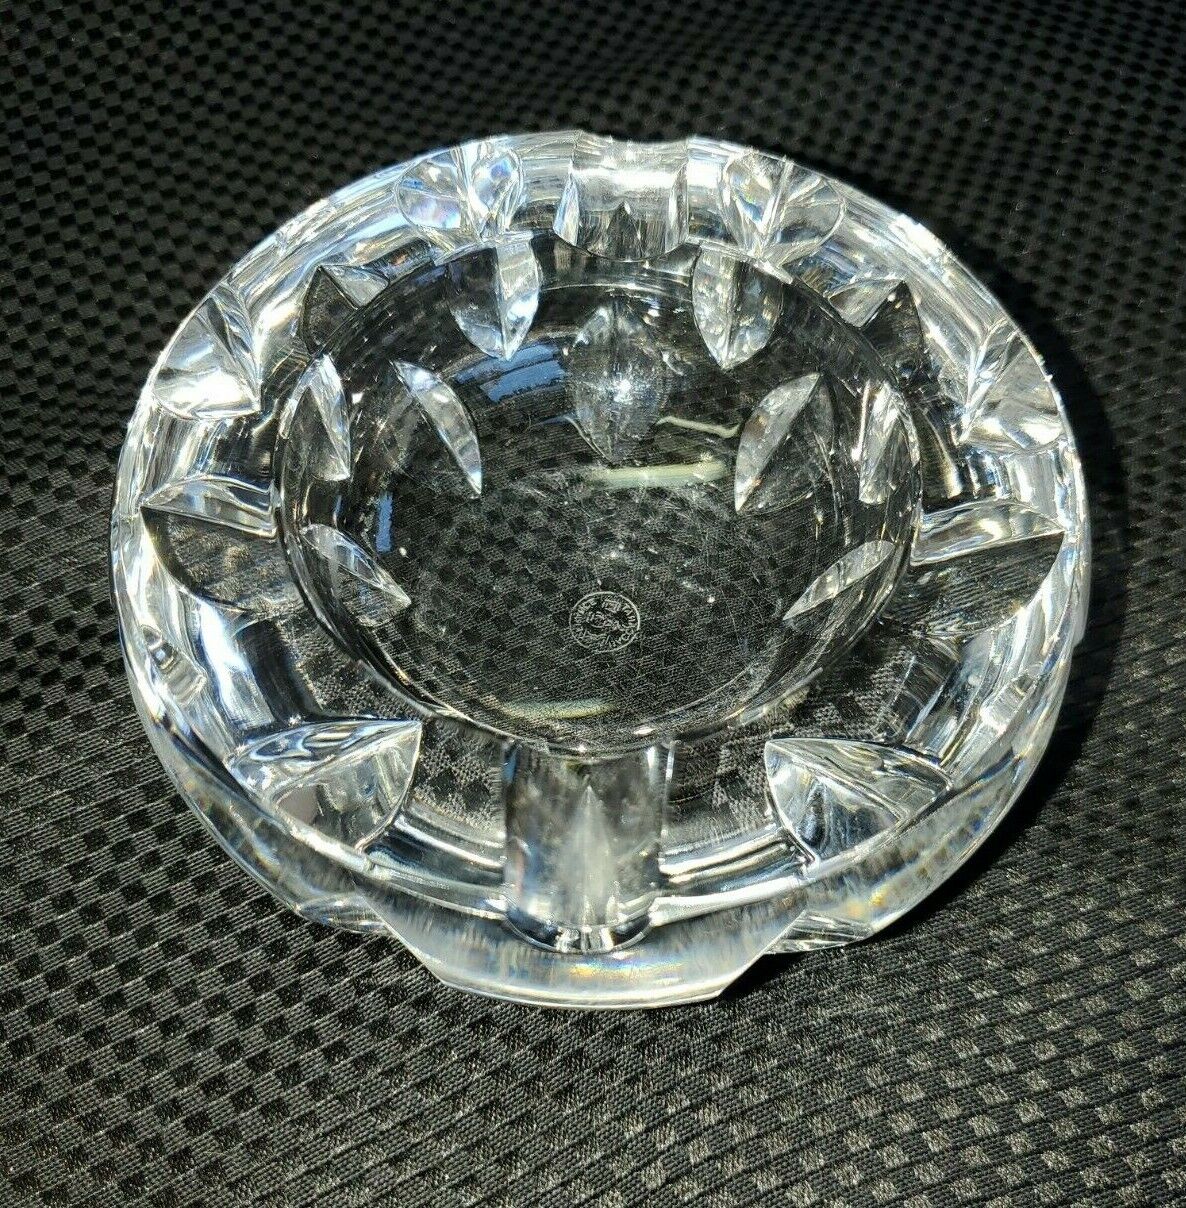 Authentic Baccarat Faceted Crystal Ash Tray - Round 2 Slot - Made In France